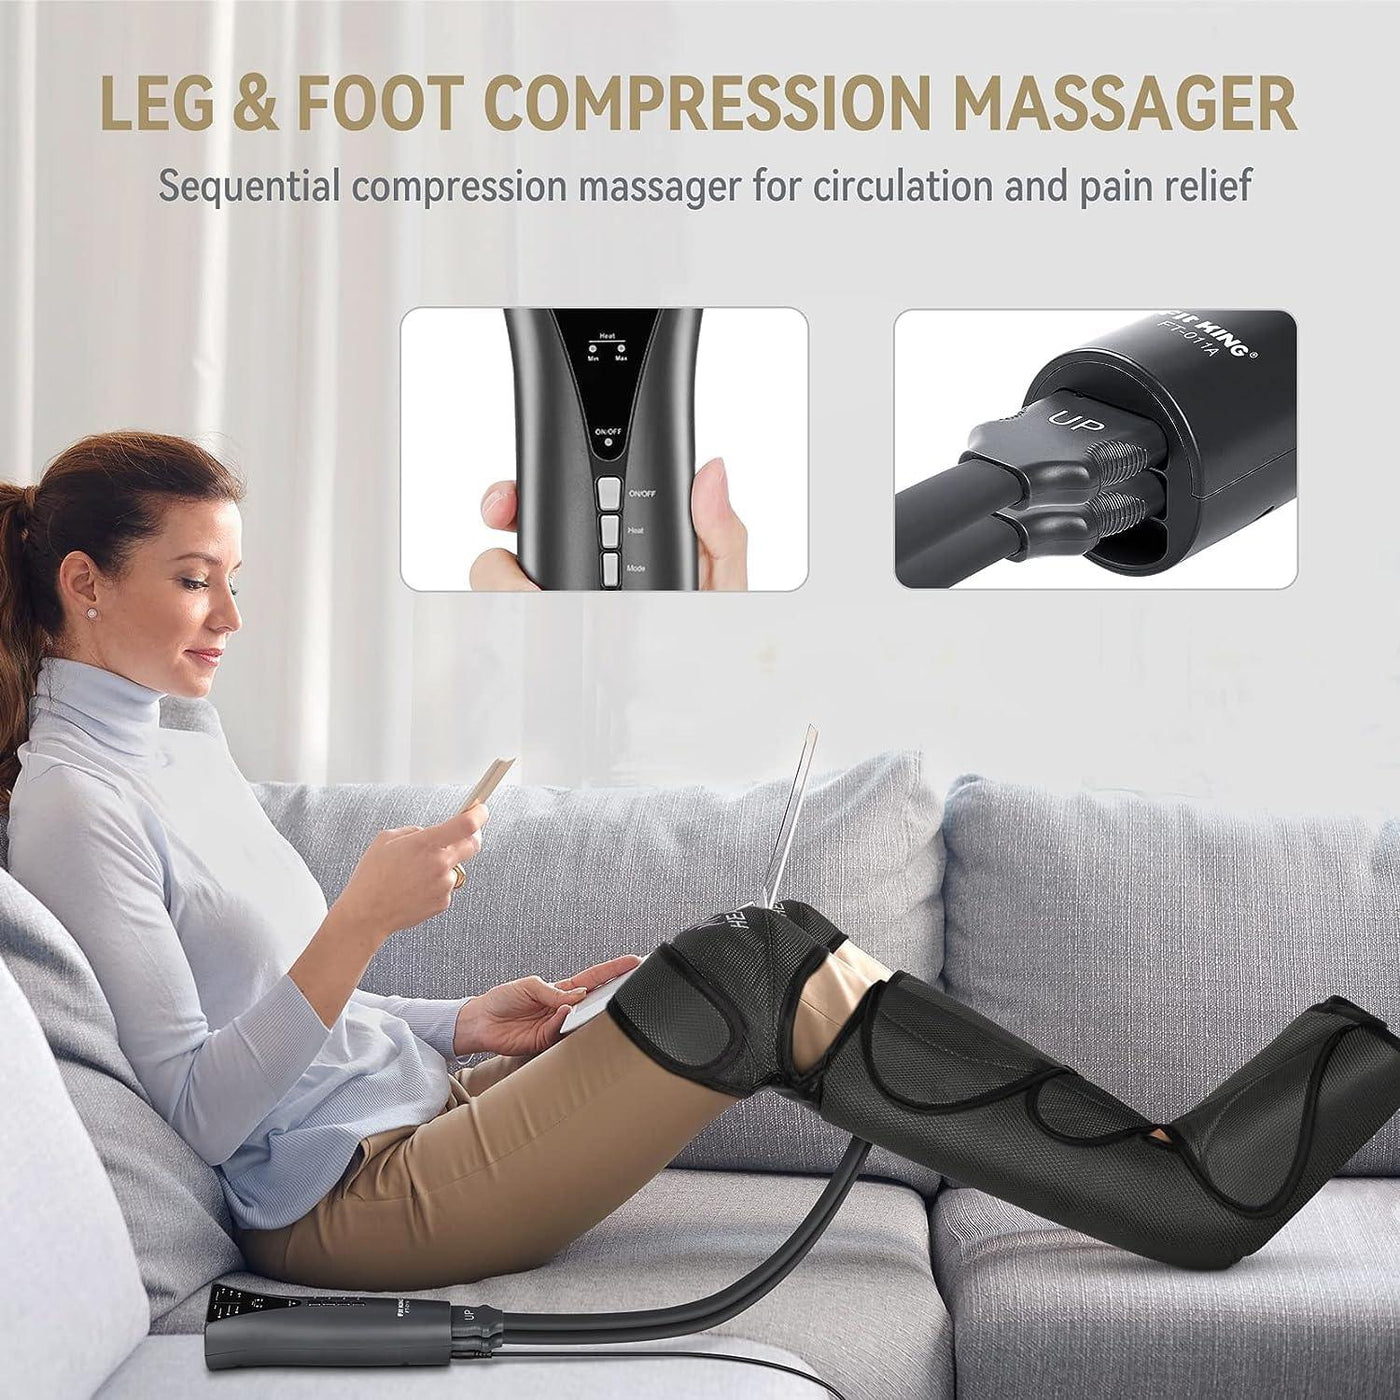 FIT KING Air Compression Leg Massager with Knee Heat, Feet Massager - Massive Discounts